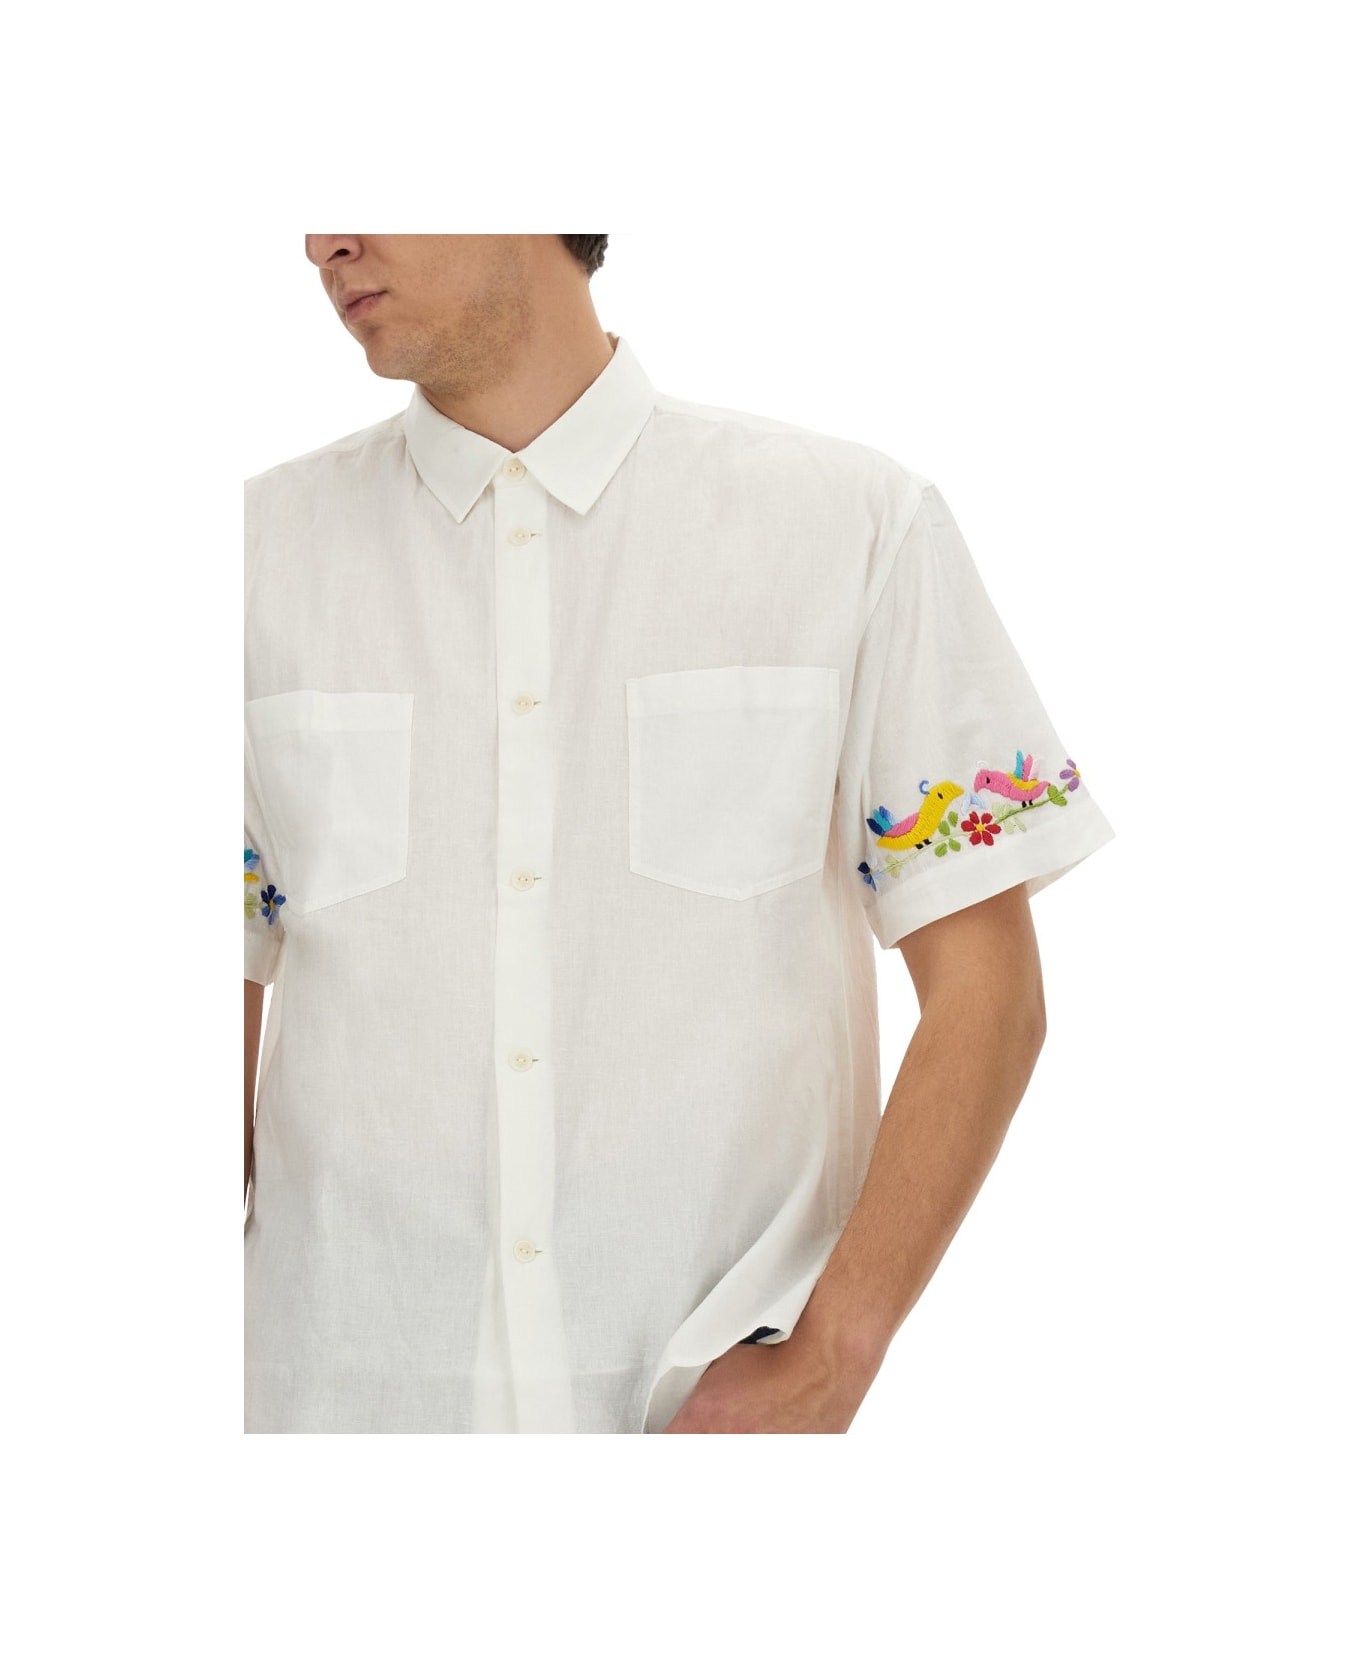 YMC Shirt With Embroidery - POWDER シャツ